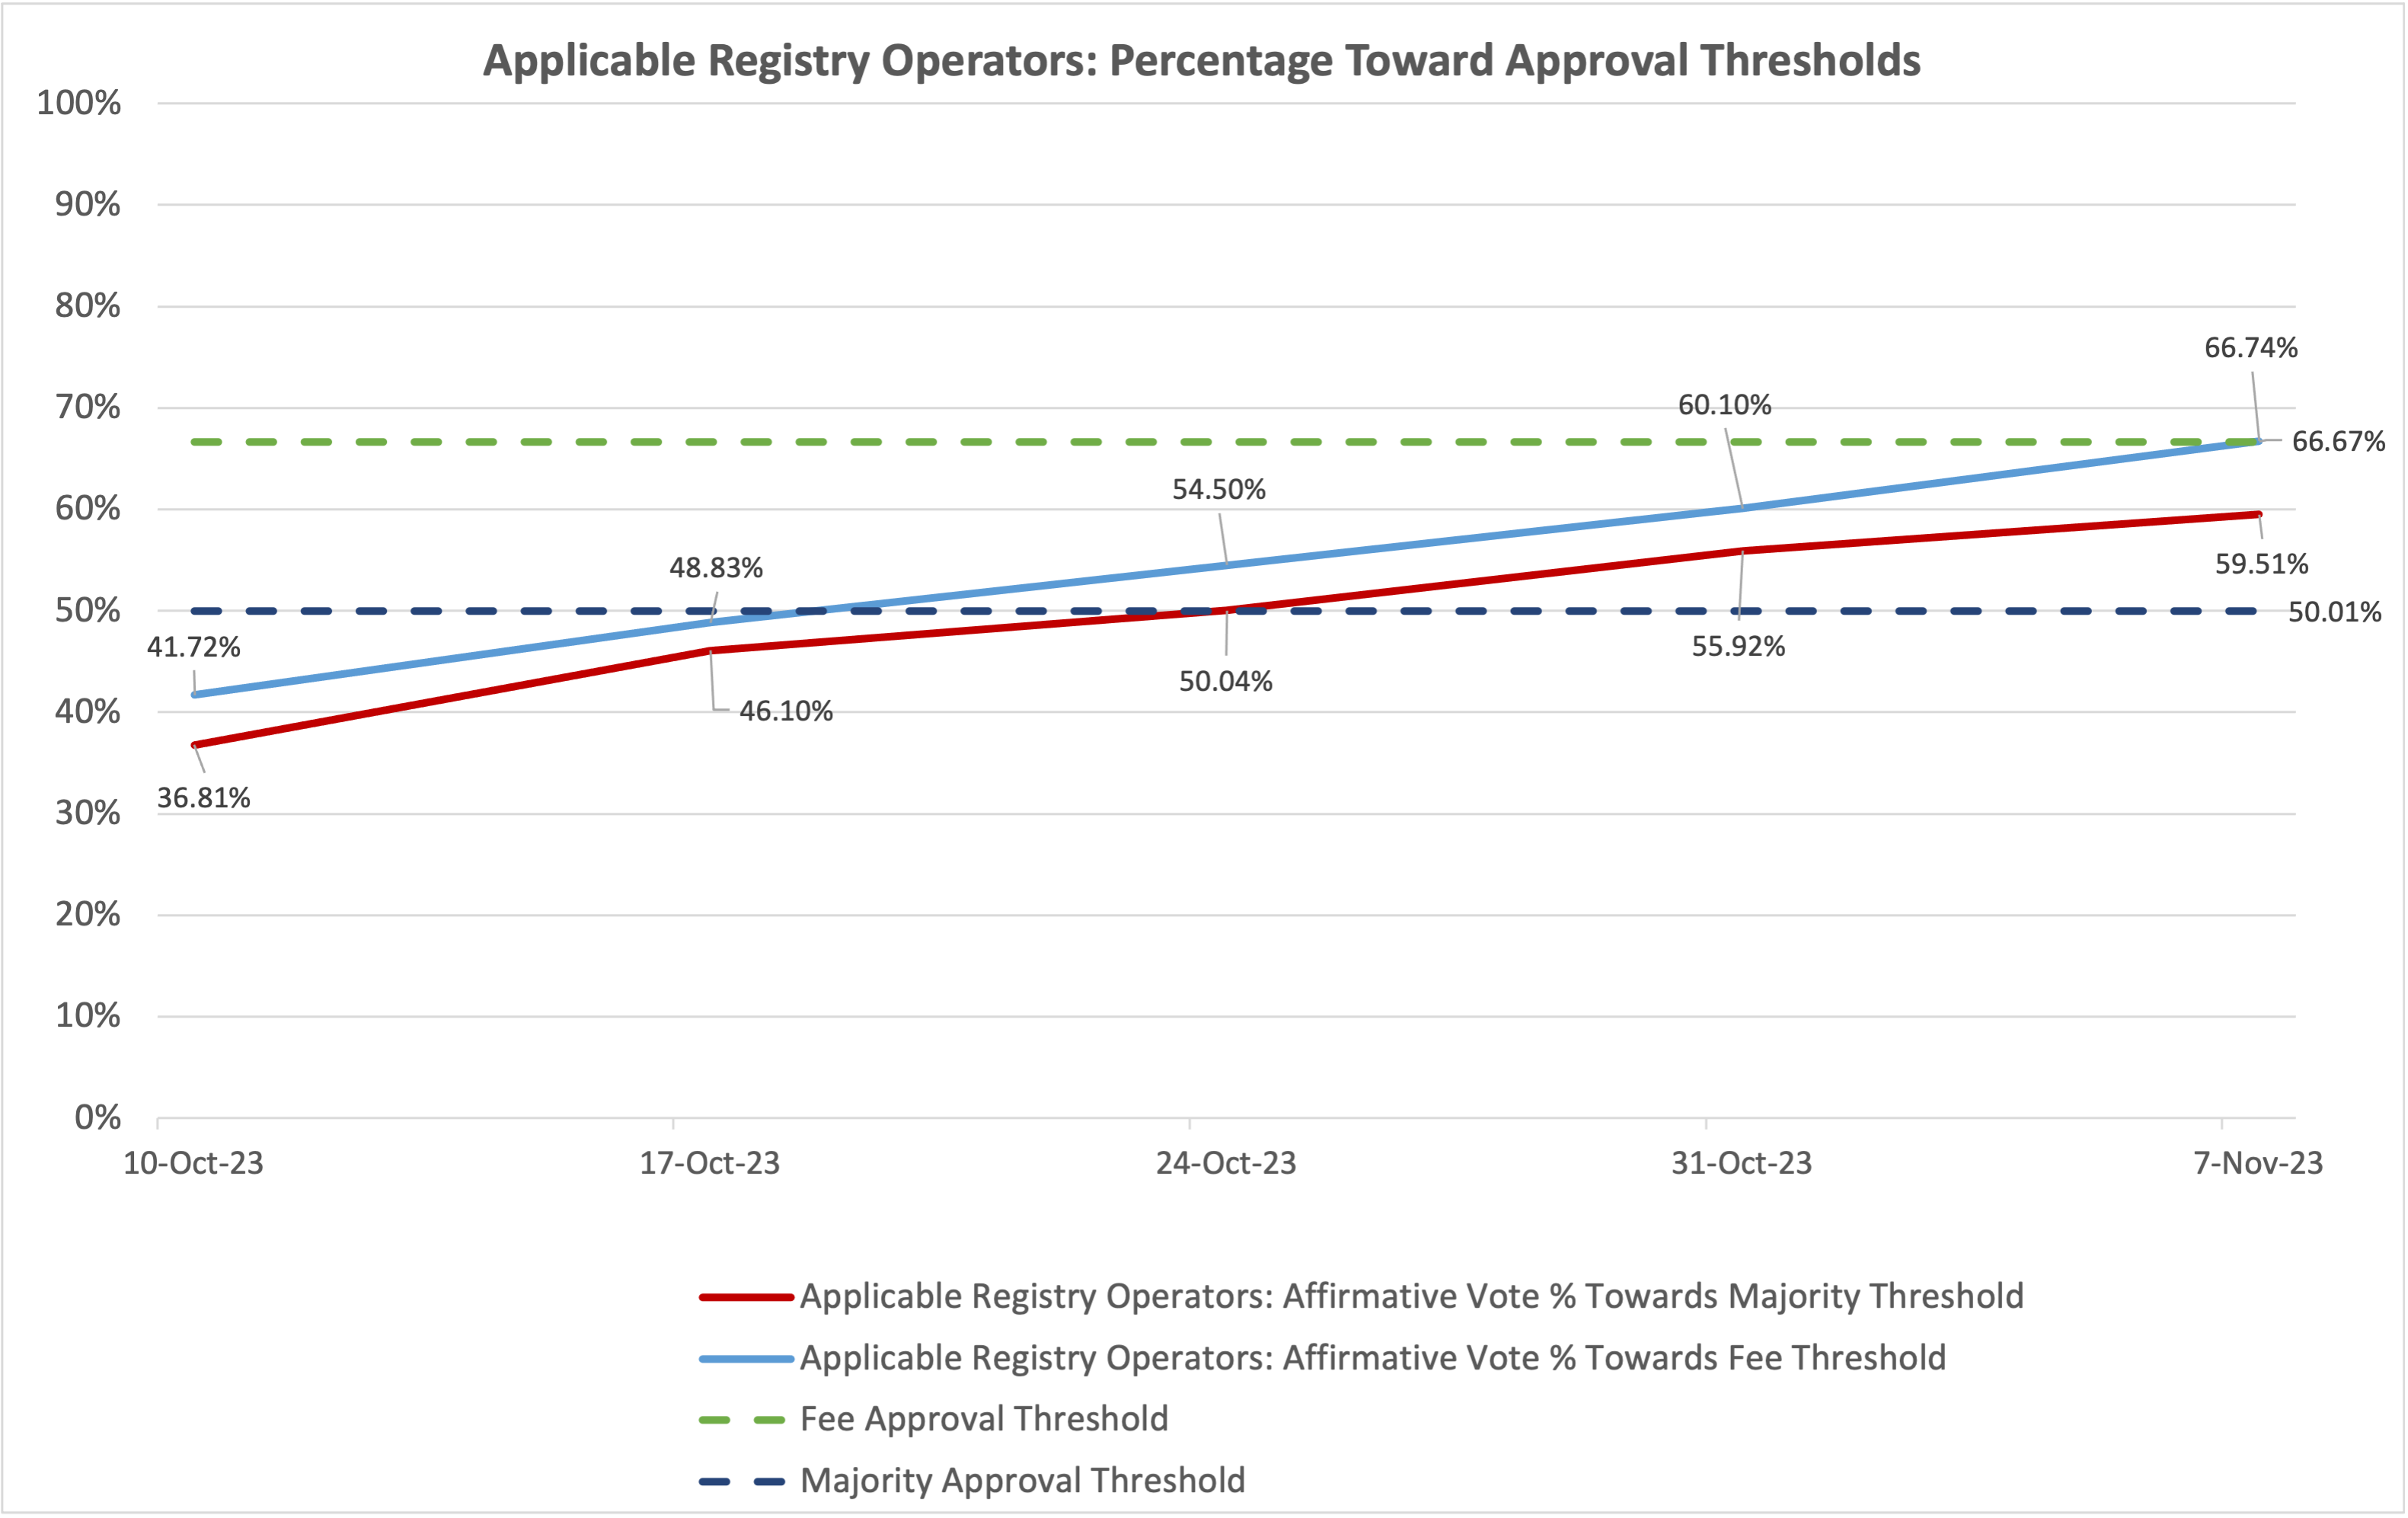 Line chart of the progress of the vote towards meeting the fee and majority threshold for Applicable Registry Operators, where the fee threshold is 66.67% and the majority threshold is 50.01%. The data shows that as of the 7th of November 2023, the affirmative vote towards the fee approval threshold is at 66.74% and the affirmative vote towards the majority approval threshold is at 59.51%.